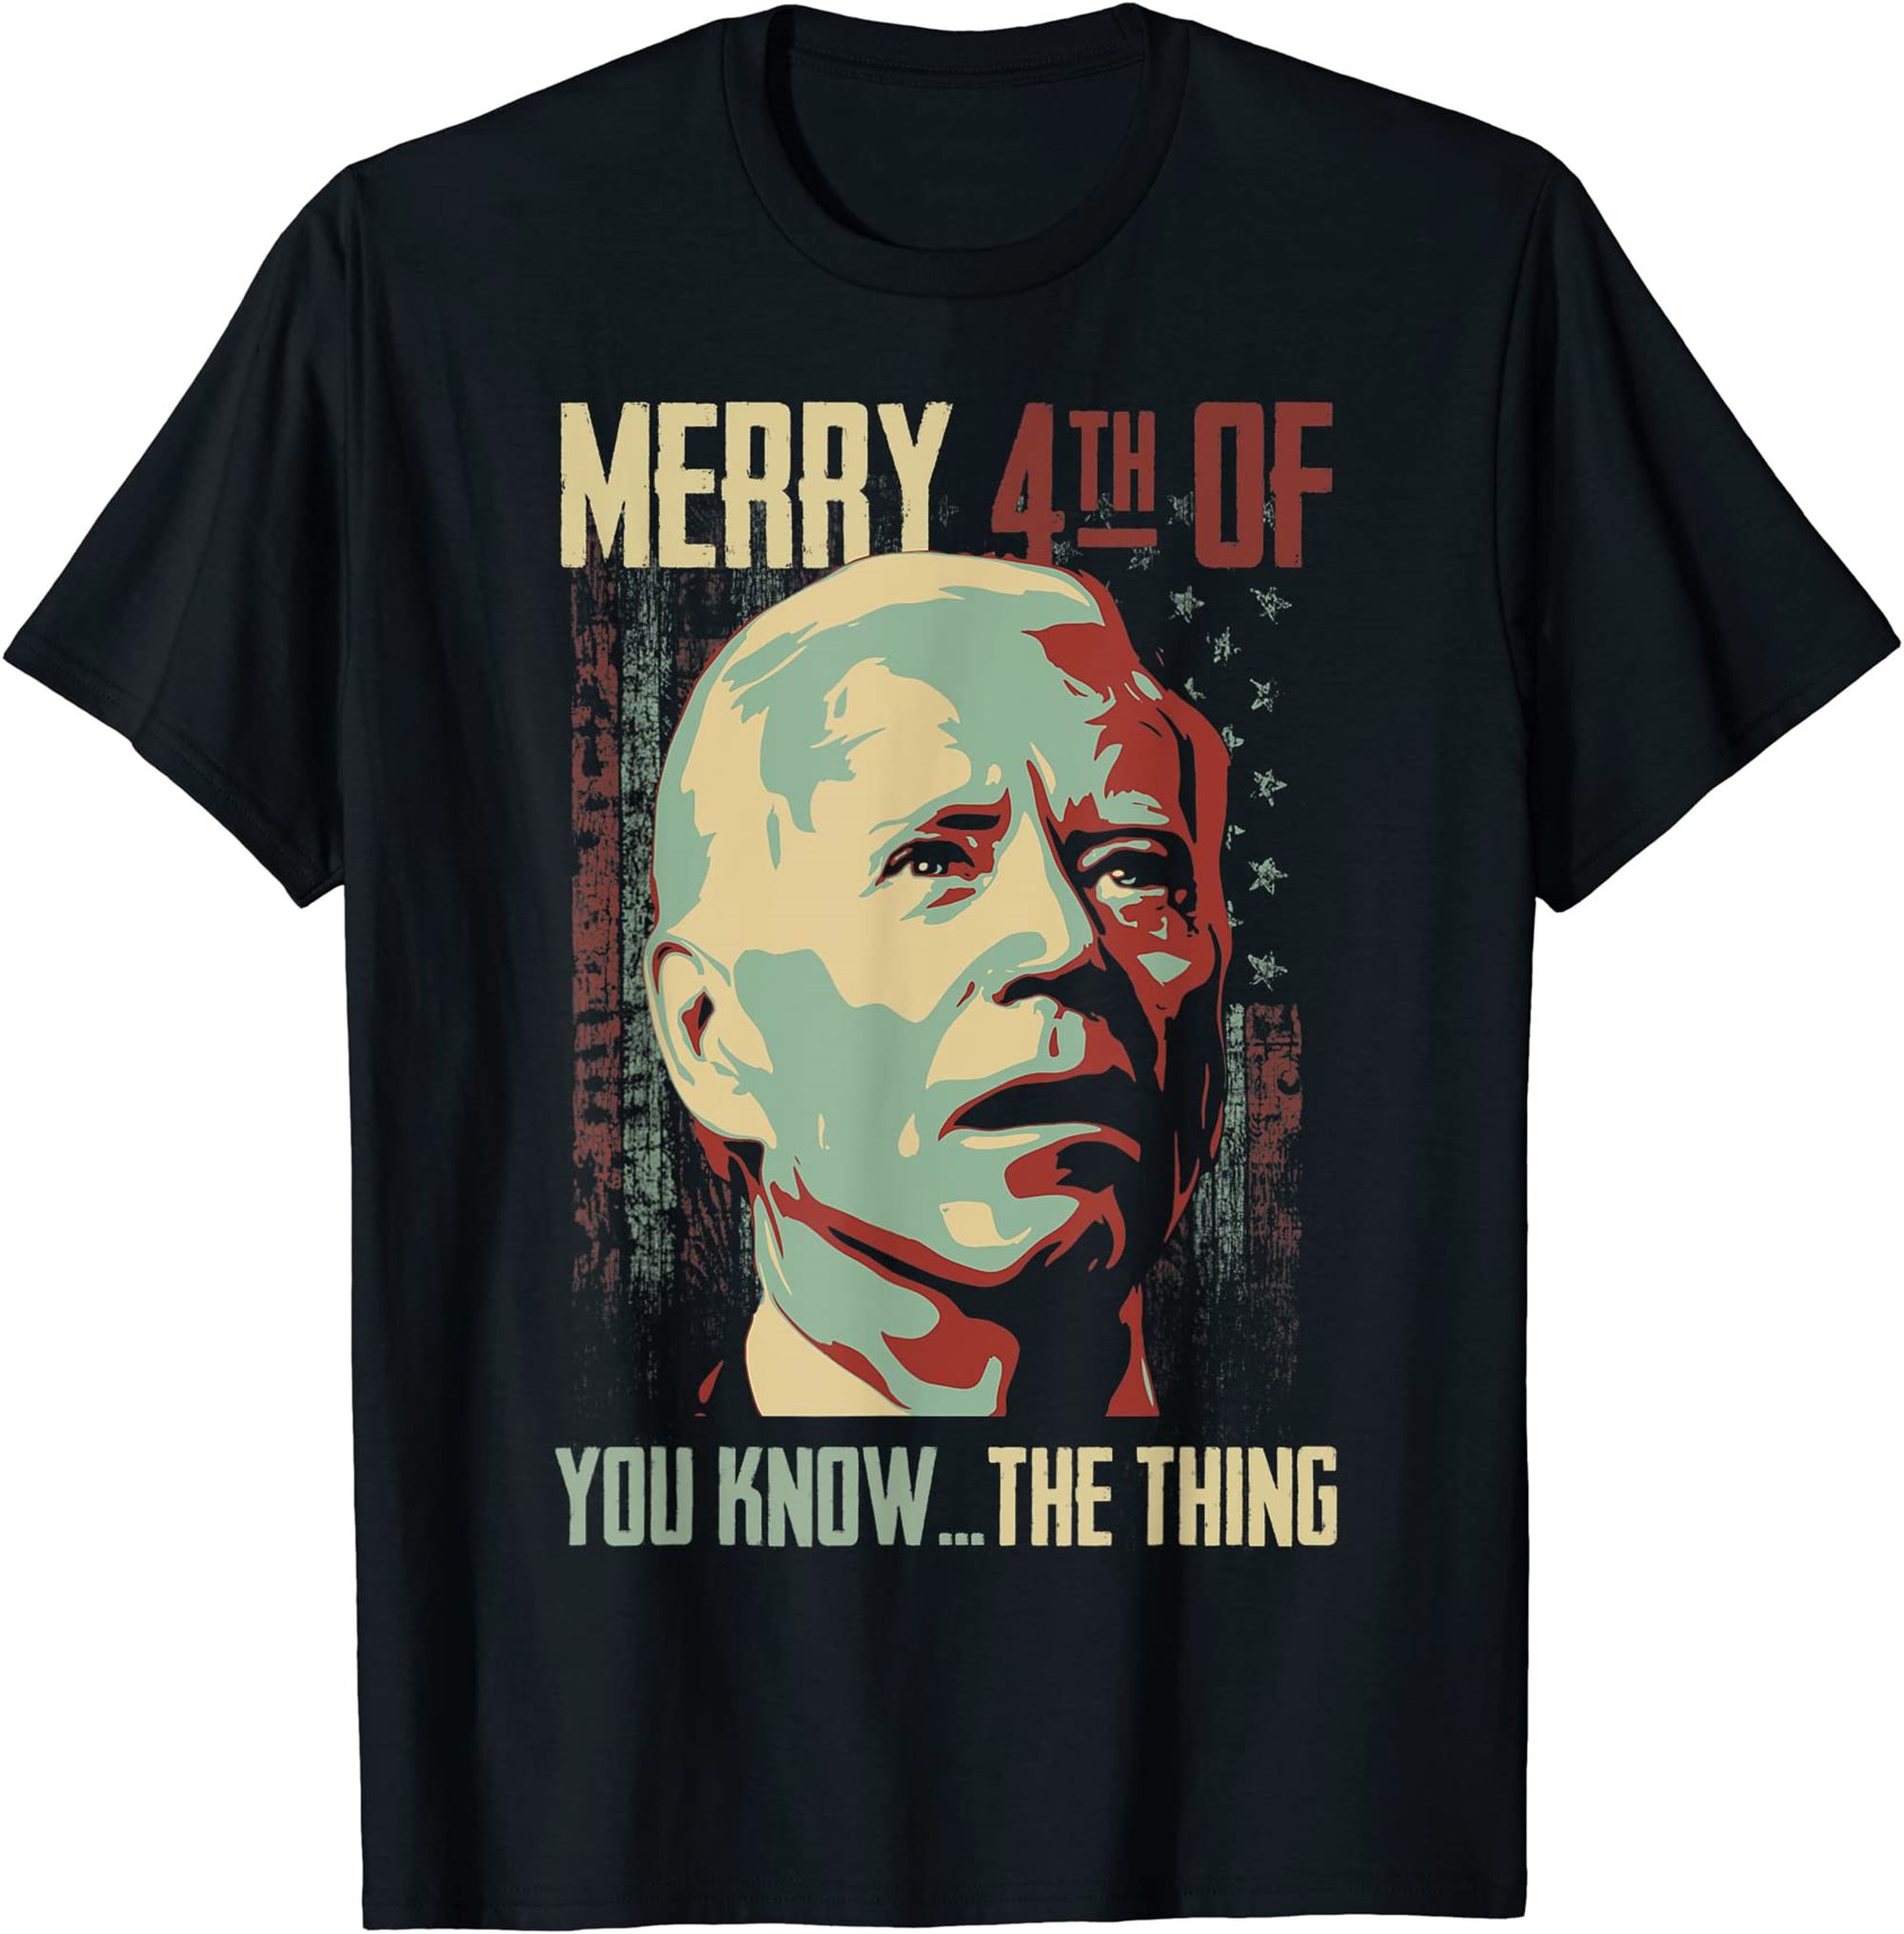 Merry 4th Of You Know The Thing Memorial Happy 4th July T-shirt Full Size Up To 5xl